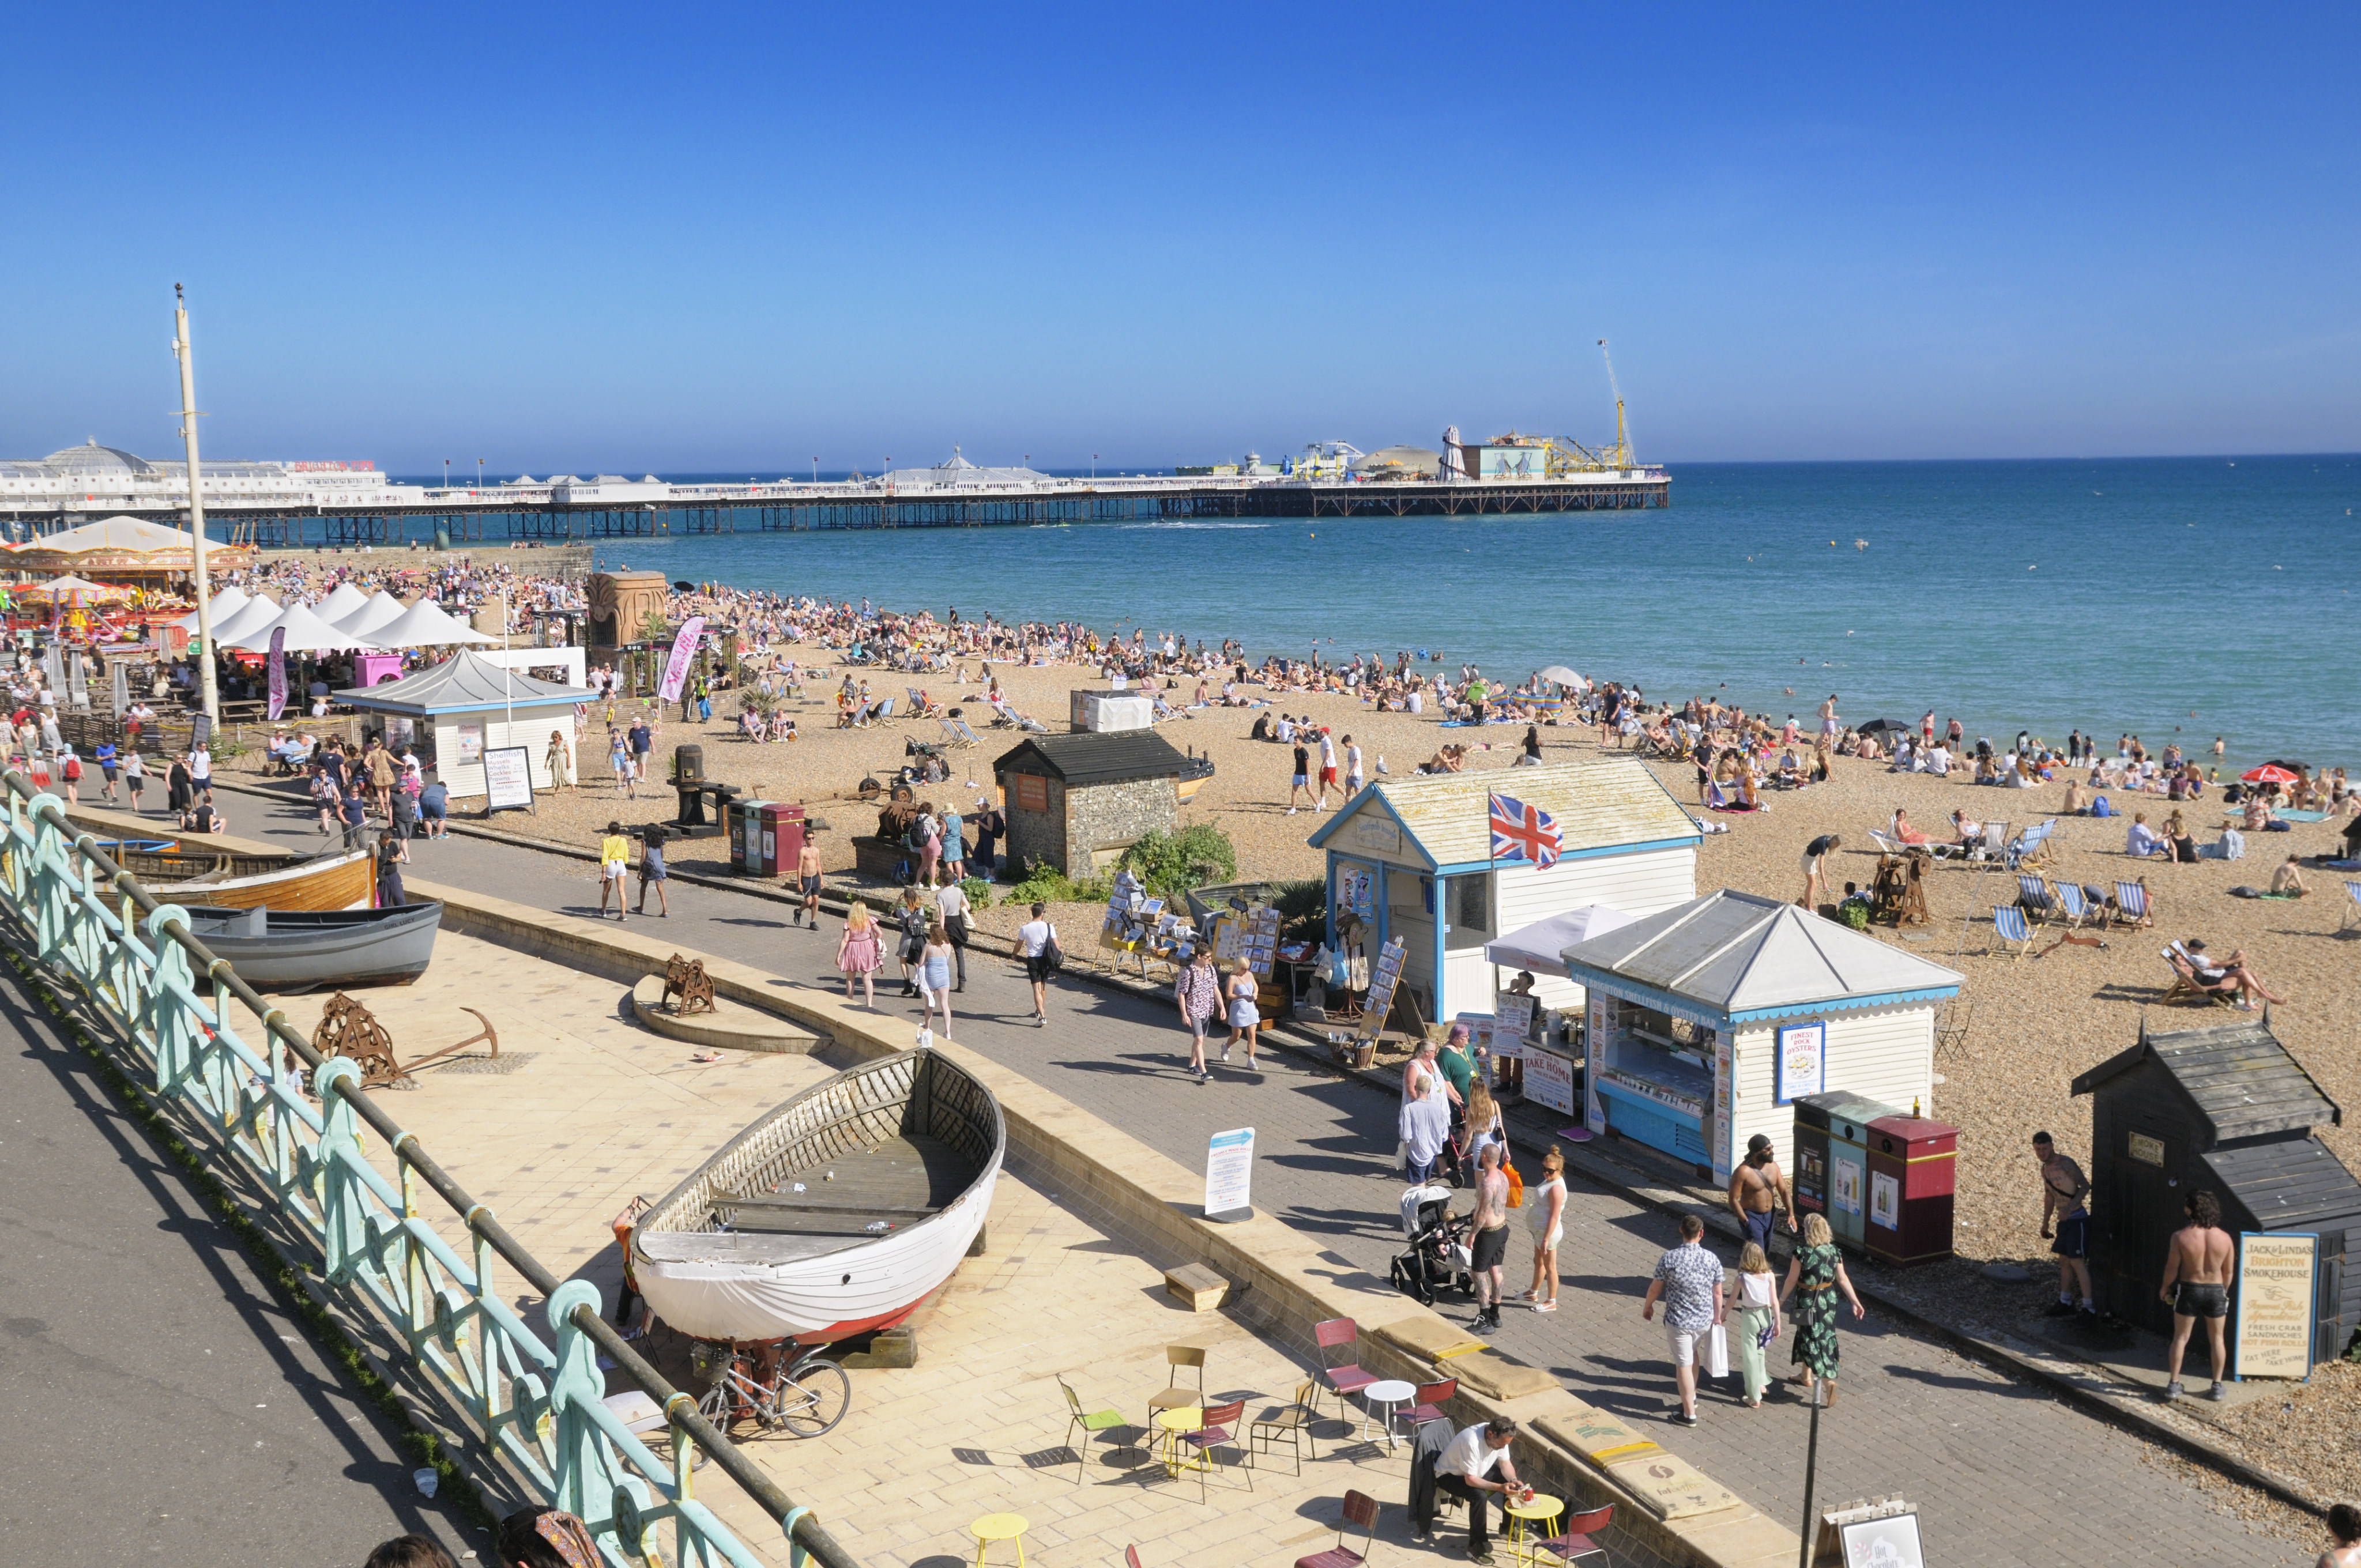 A rare sunny summer’s day at the beach in Brighton, on England’s south coast. Photo: Getty Images